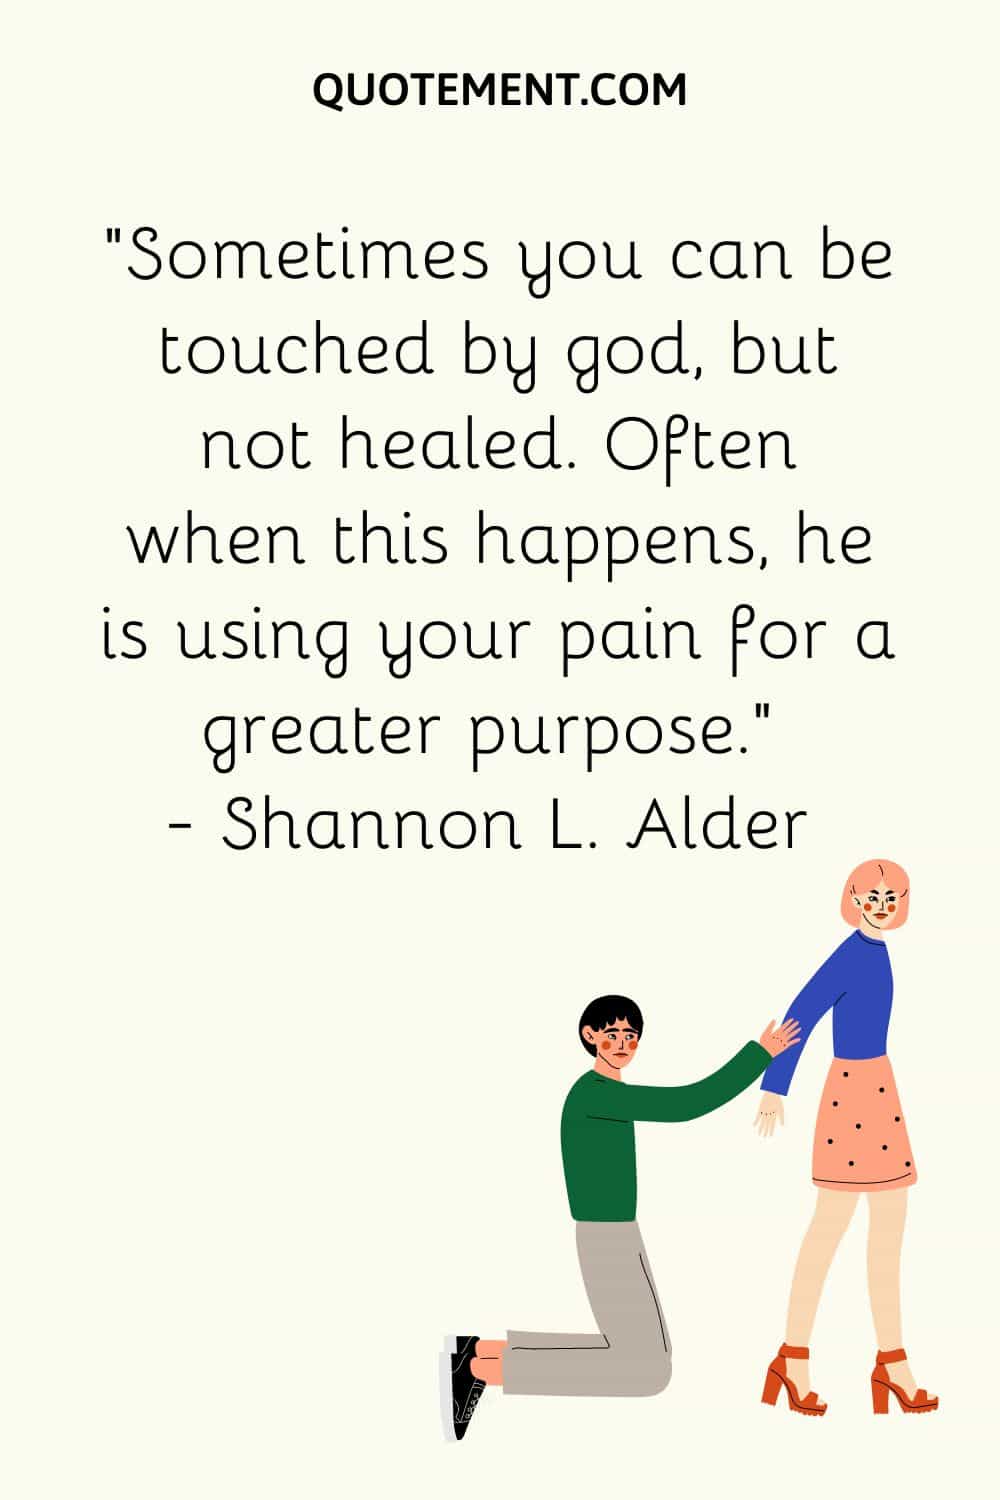 Sometimes you can be touched by god, but not healed. Often when this happens, he is using your pain for a greater purpose